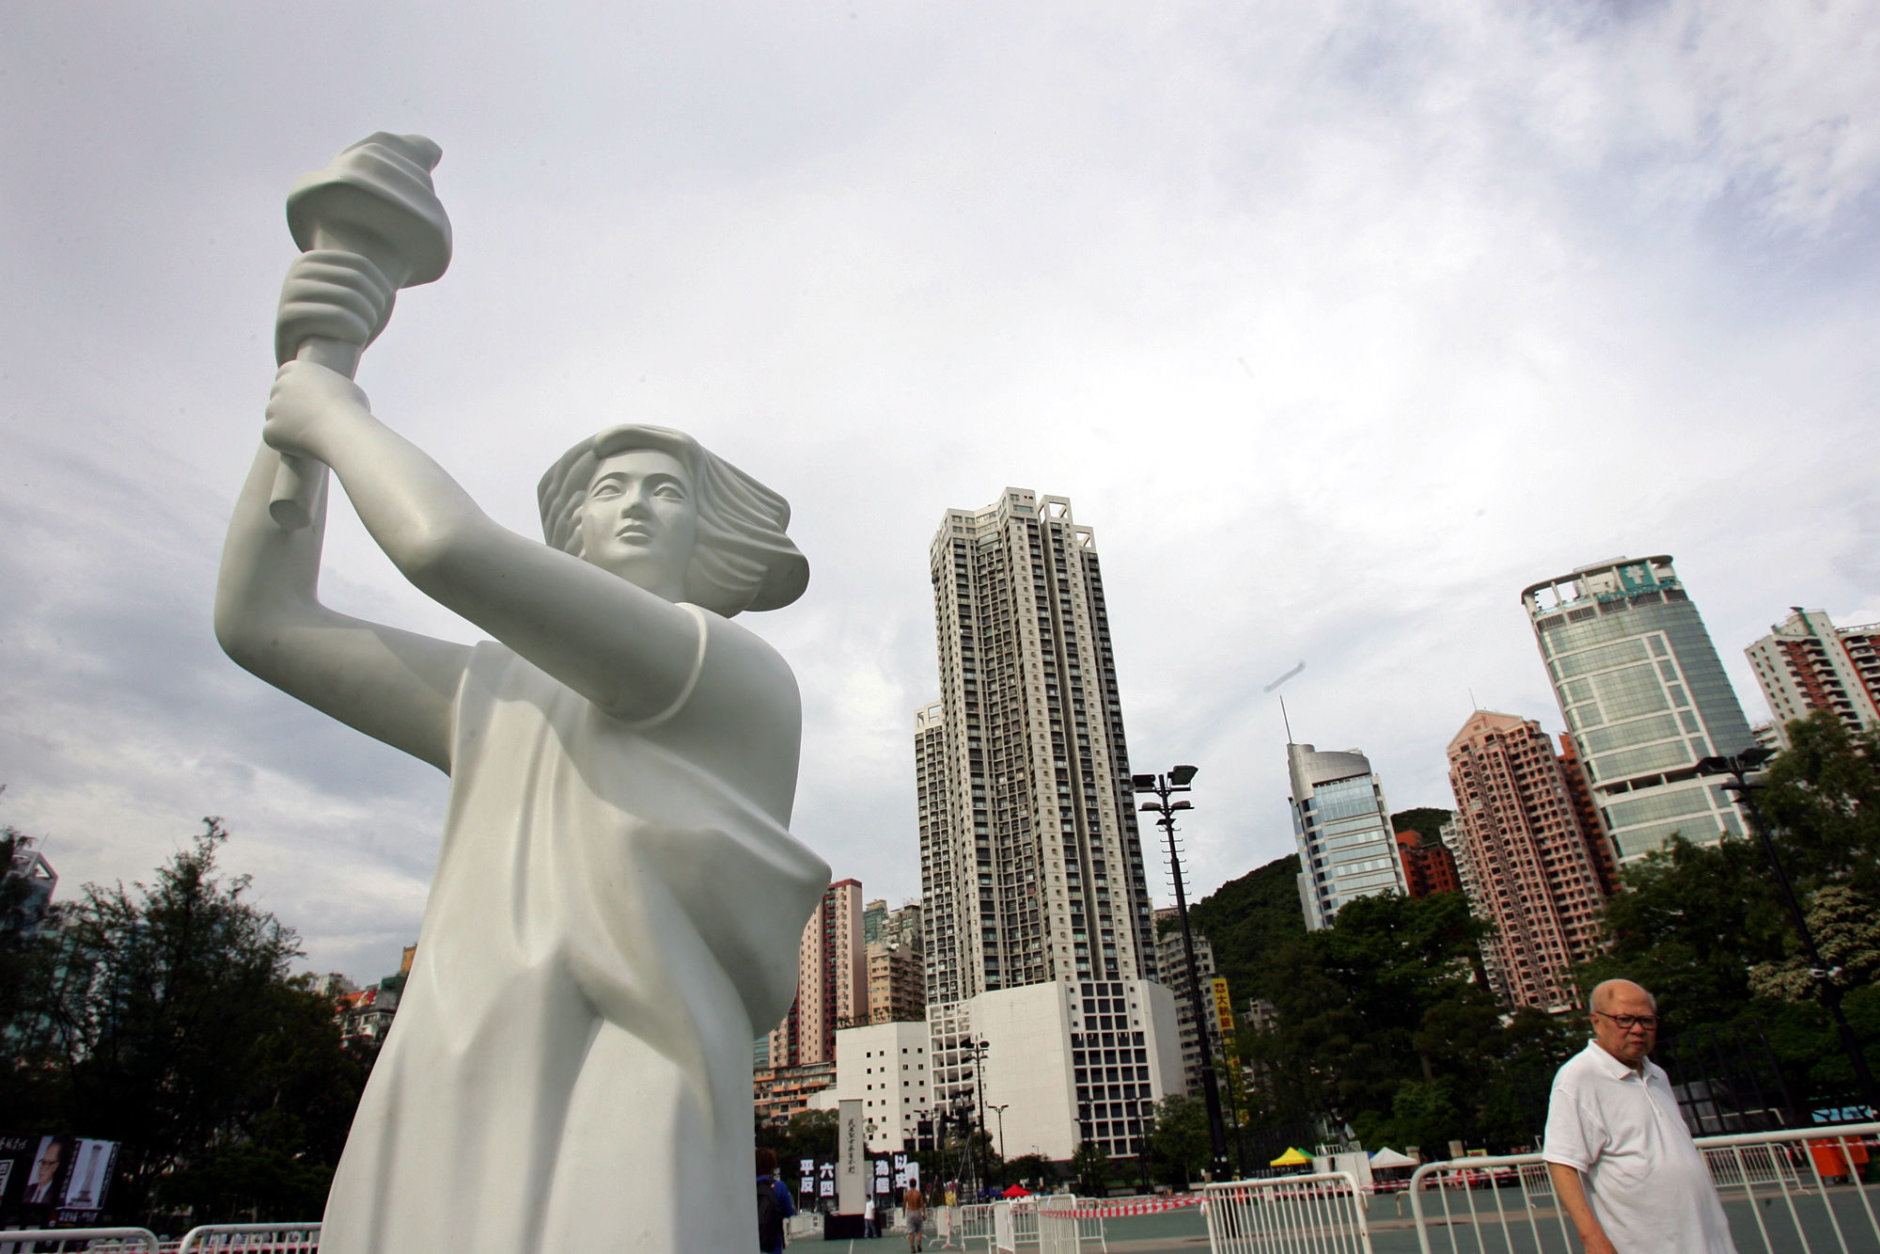 A statue of "Goddess of Democracy" is erected, marking the 16th anniversary of Tiananmen Square crackdown on students stands against the sky at Hong Kong's Victoria park Saturday, June 4, 2005. Tens of thousands of people are expected Friday night at the park for a candlelight vigil commemorating the Tiananmen Square incident and also demanding democracy for Hong Kong. (AP Photo/Vincent Yu)